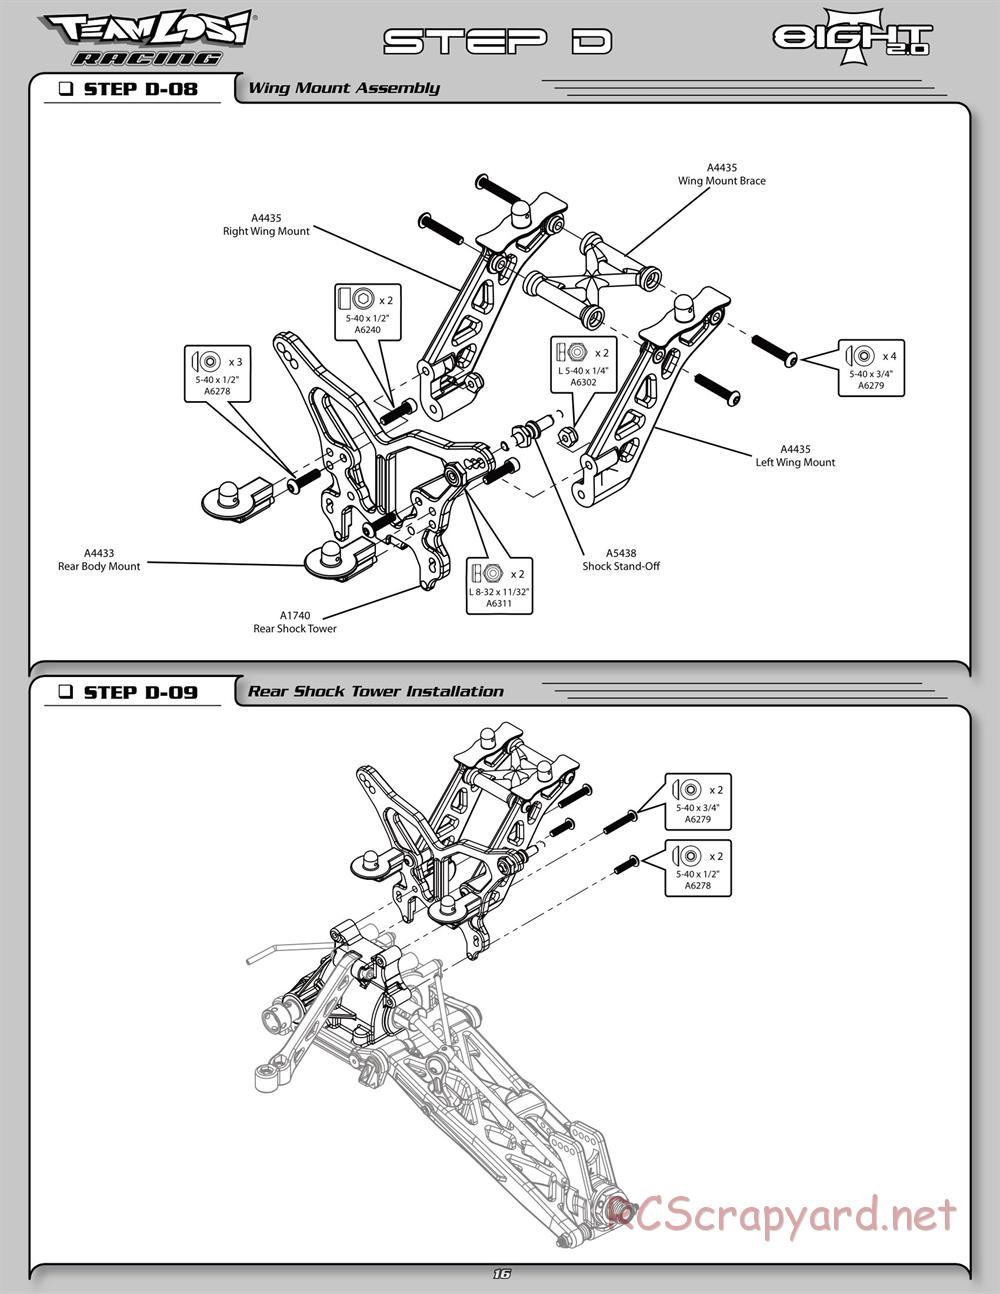 Team Losi - 8ight-T 2.0 Race Roller - Manual - Page 21